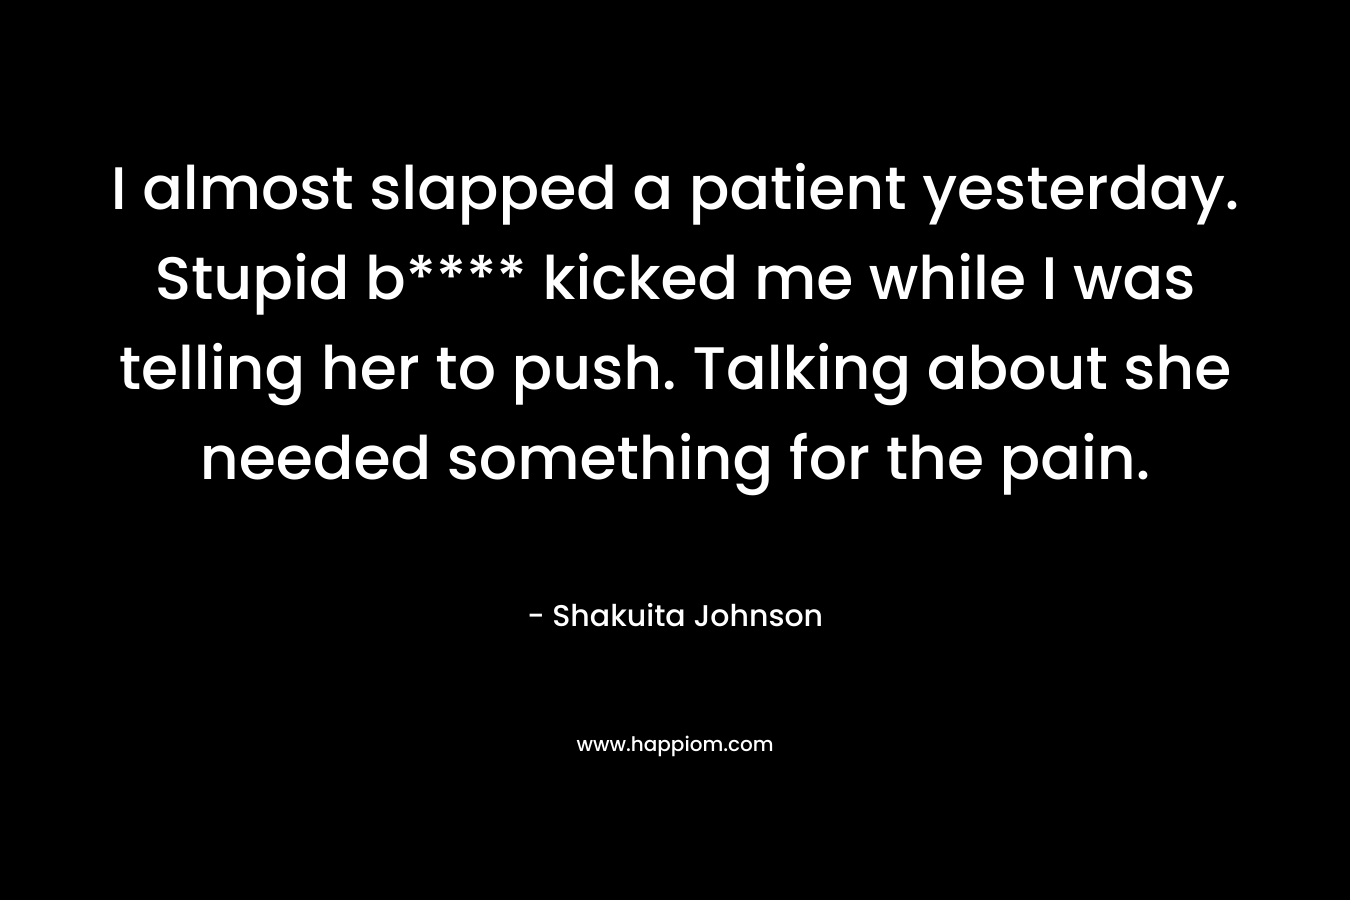 I almost slapped a patient yesterday. Stupid b**** kicked me while I was telling her to push. Talking about she needed something for the pain. – Shakuita Johnson